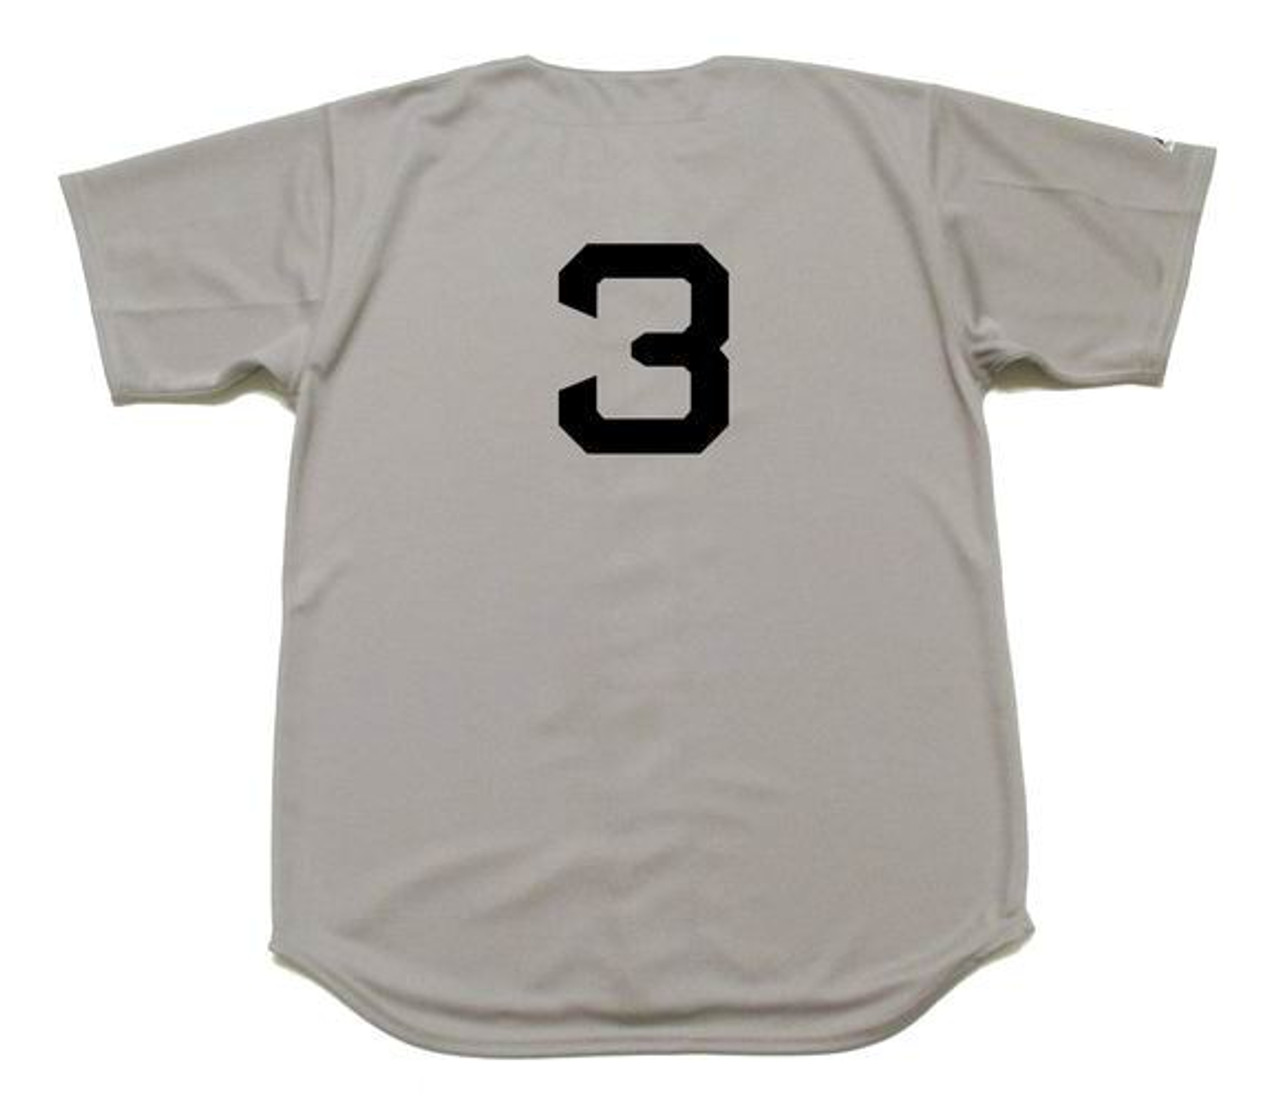 Babe Ruth Jersey - New York Yankees 1934 Away Cooperstown